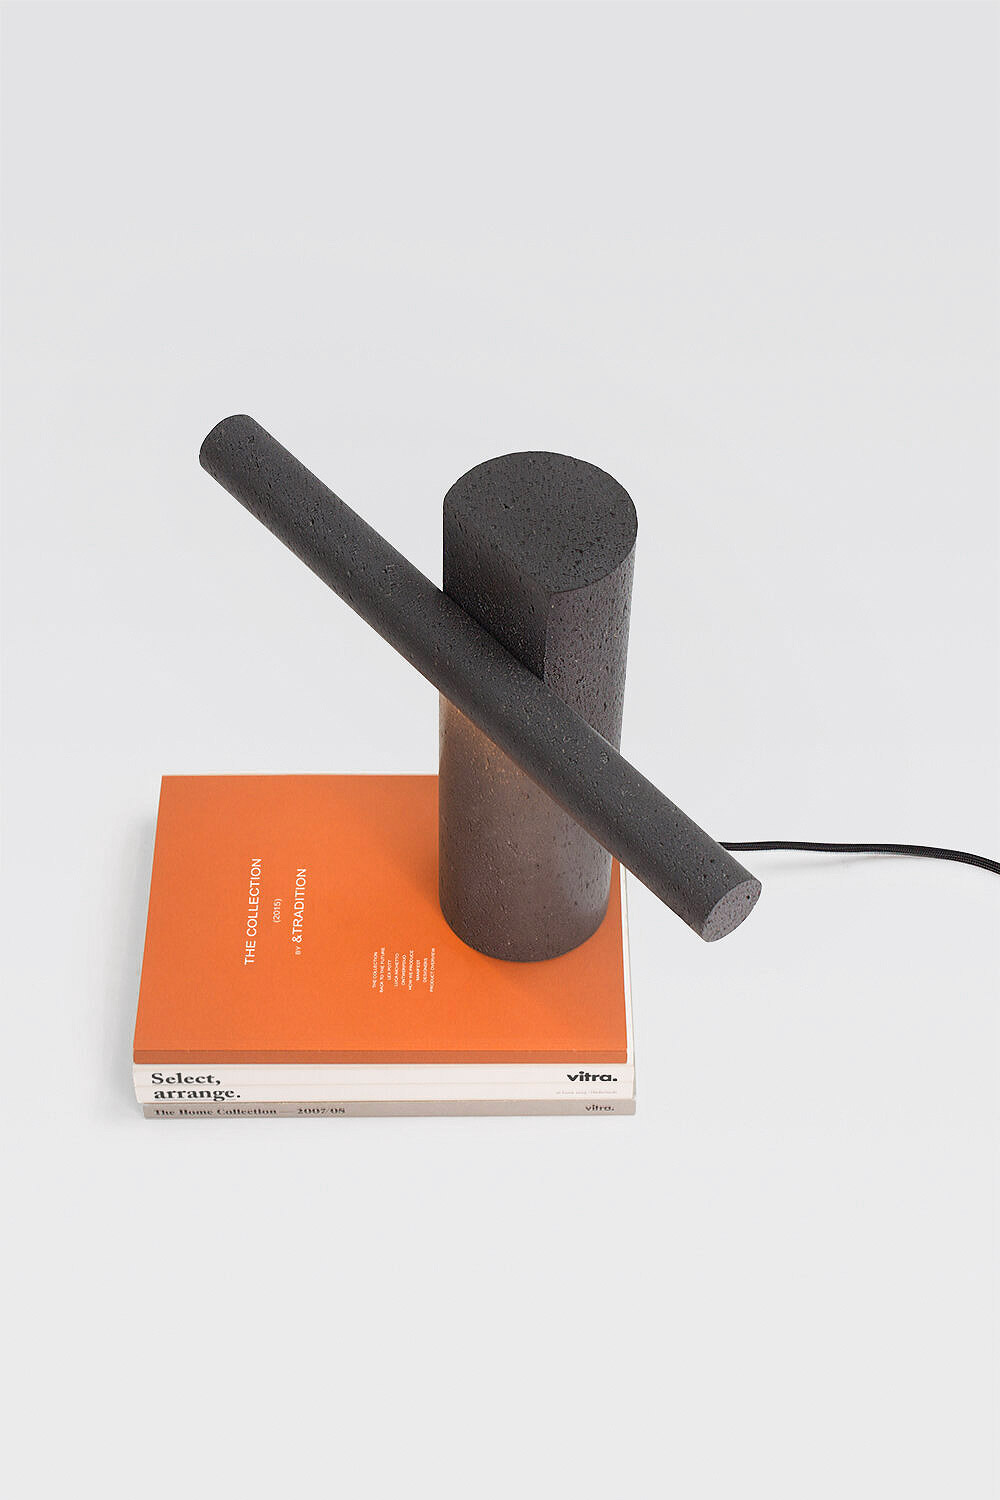 Drill Lamp by LeviSarha - Minimalist Table Lamp made of basalt, a volcanic stone standing on an orange book | Aesence